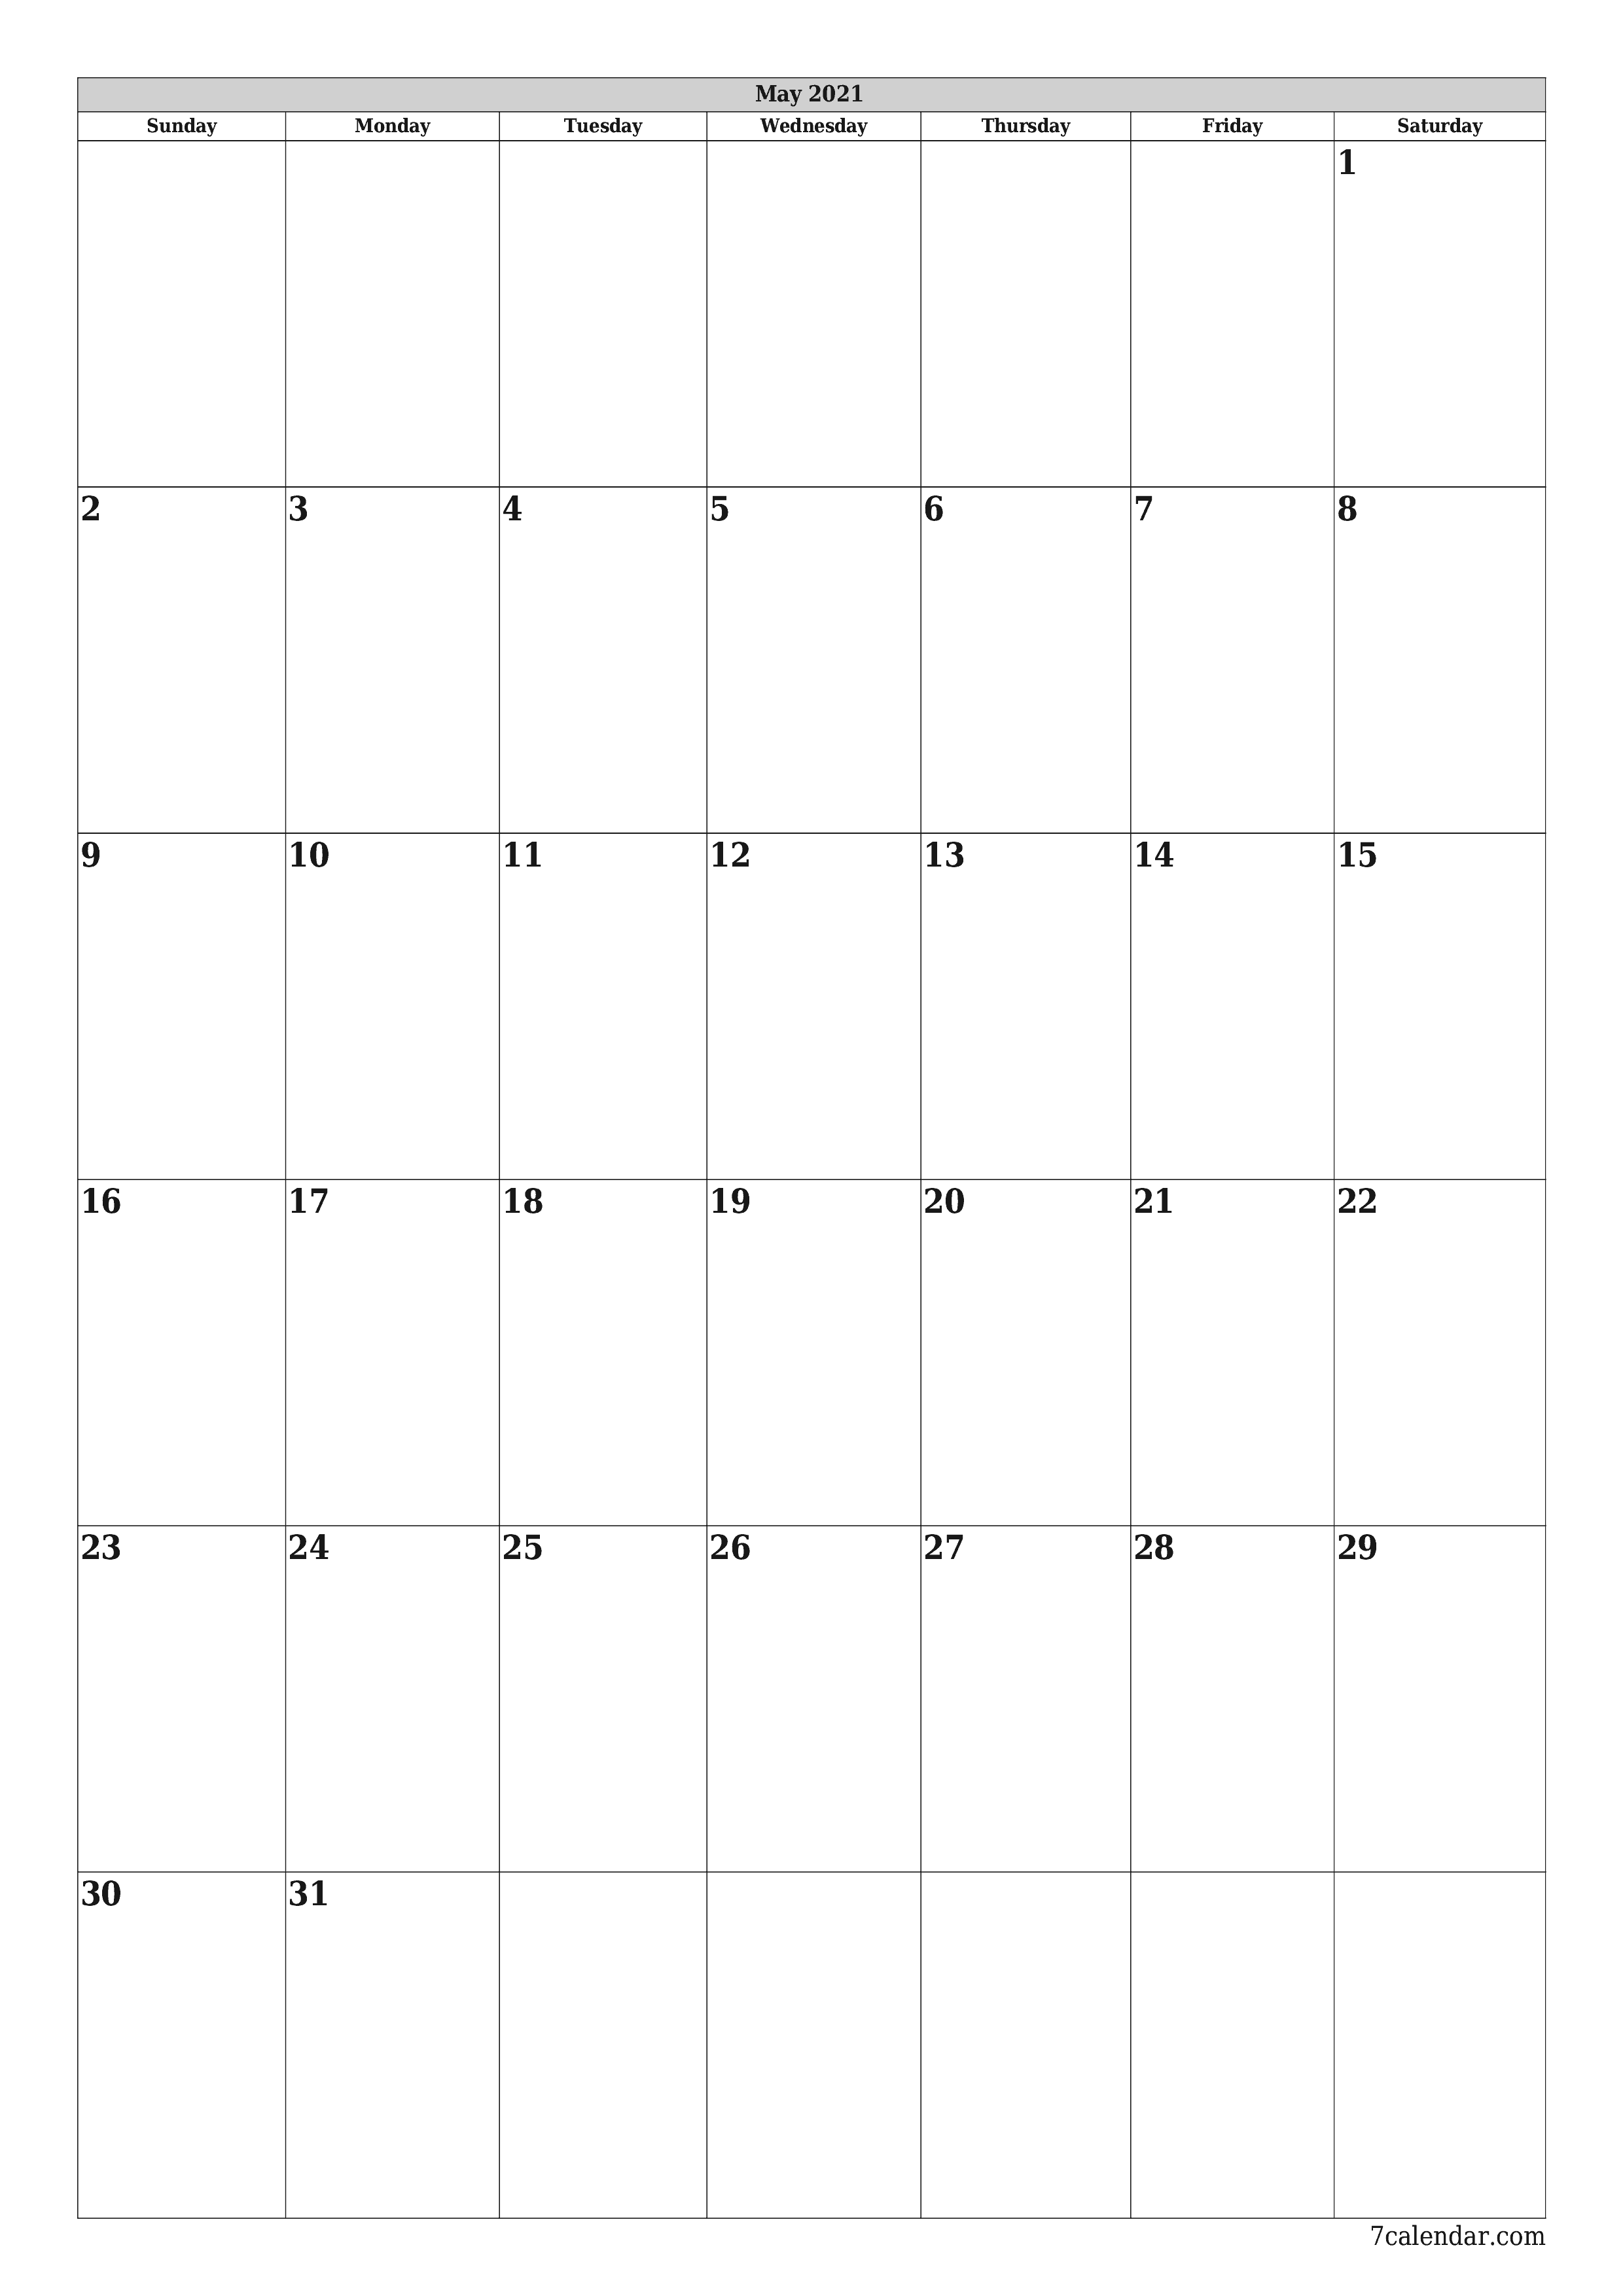 Blank monthly printable calendar and planner for month May 2021 with notes save and print to PDF PNG English